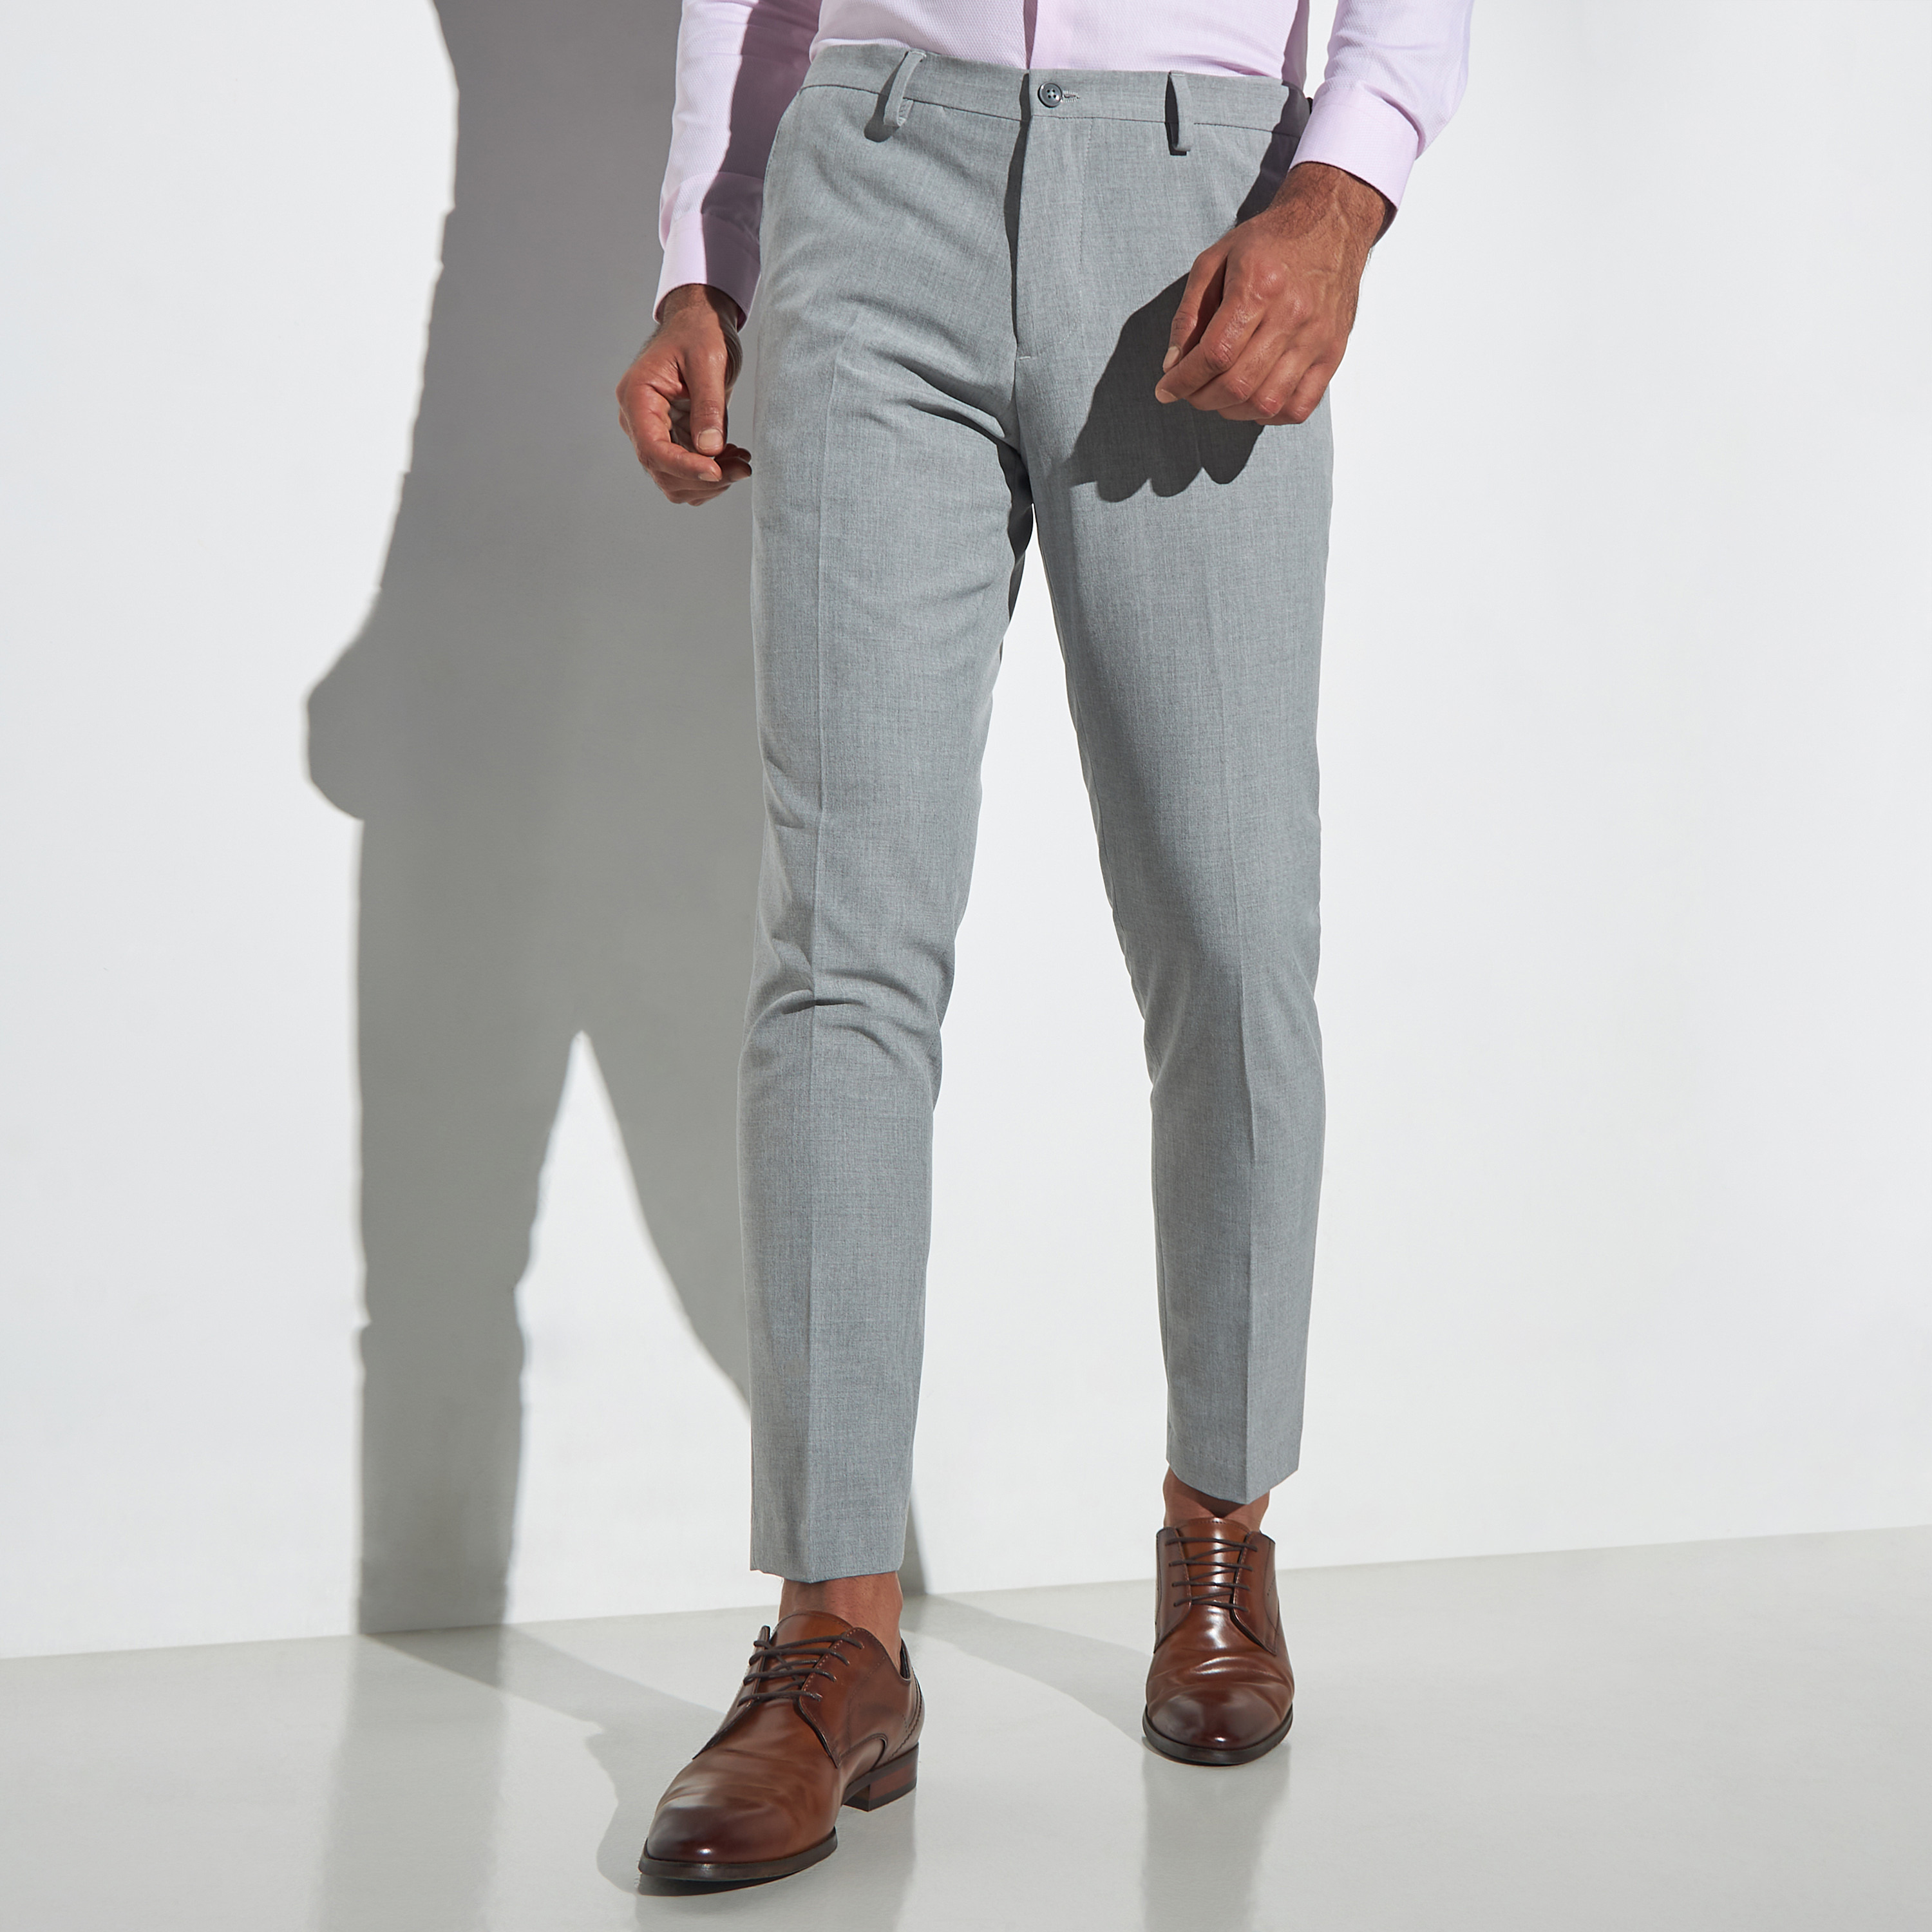 Slim Fit High Waisted Mens Formal Trousers Sale For Business, Weddings, And  Social Events English Naples Style With Straight Cropped Pants From  Longan08, $36.75 | DHgate.Com